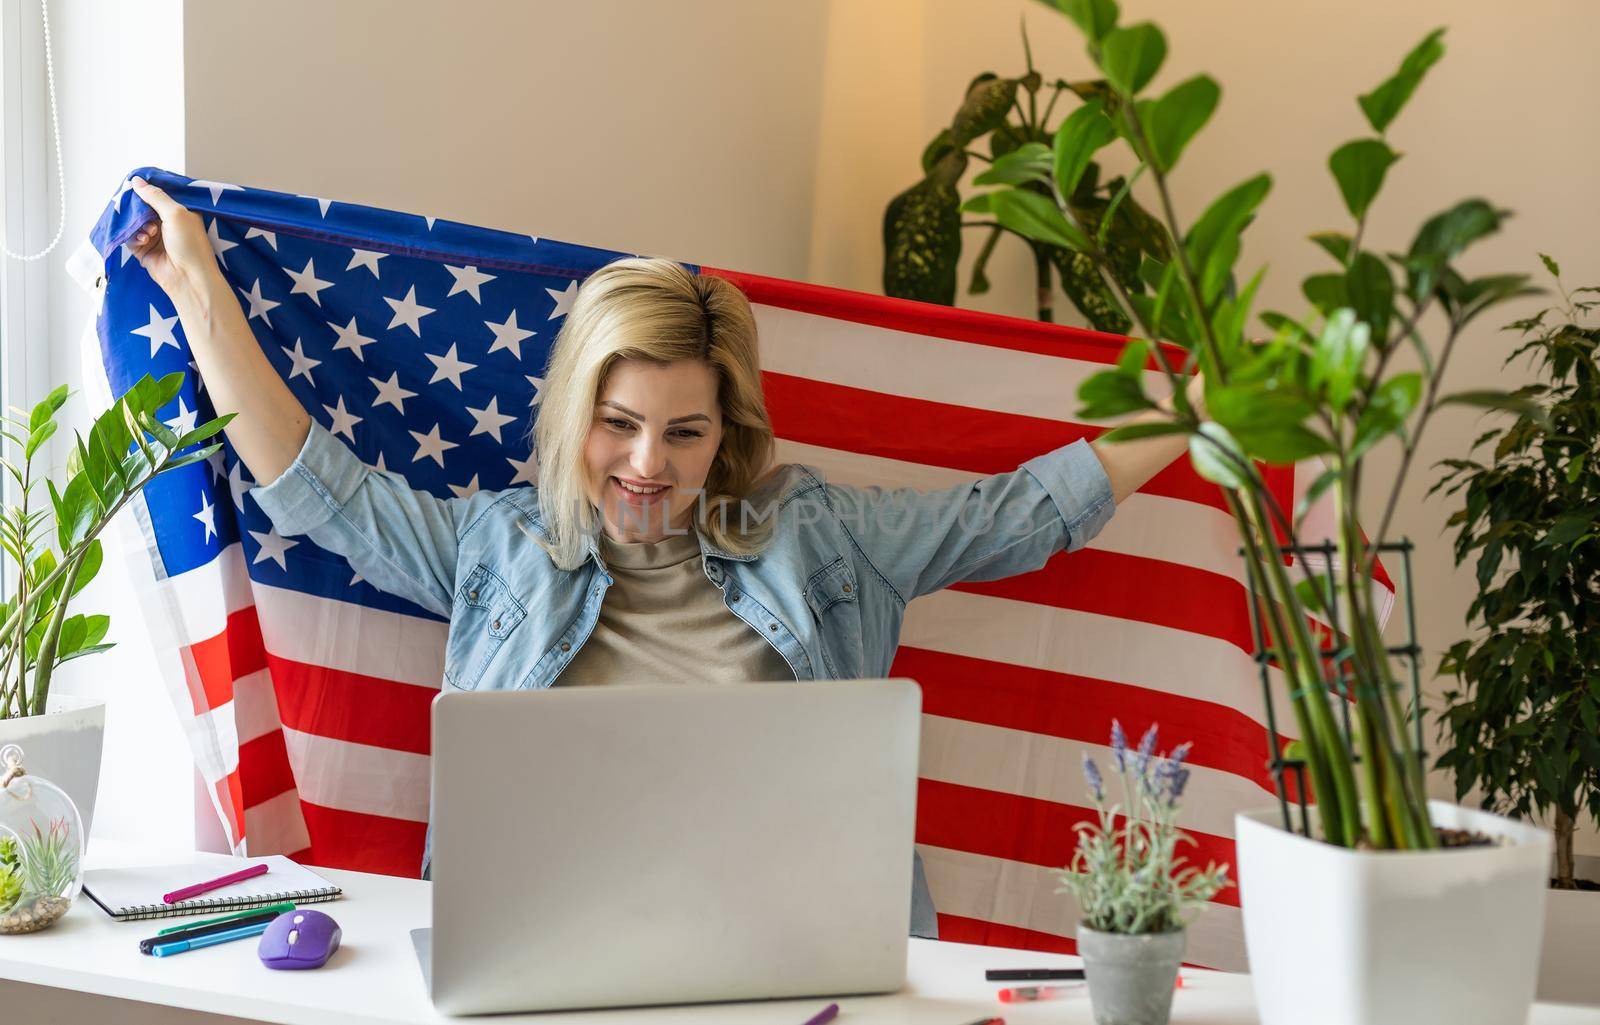 Happy young female student hold flag of USA, studying with laptop with blank screen in living room interior. International education at home, lesson remote, website due covid-19 quarantine.